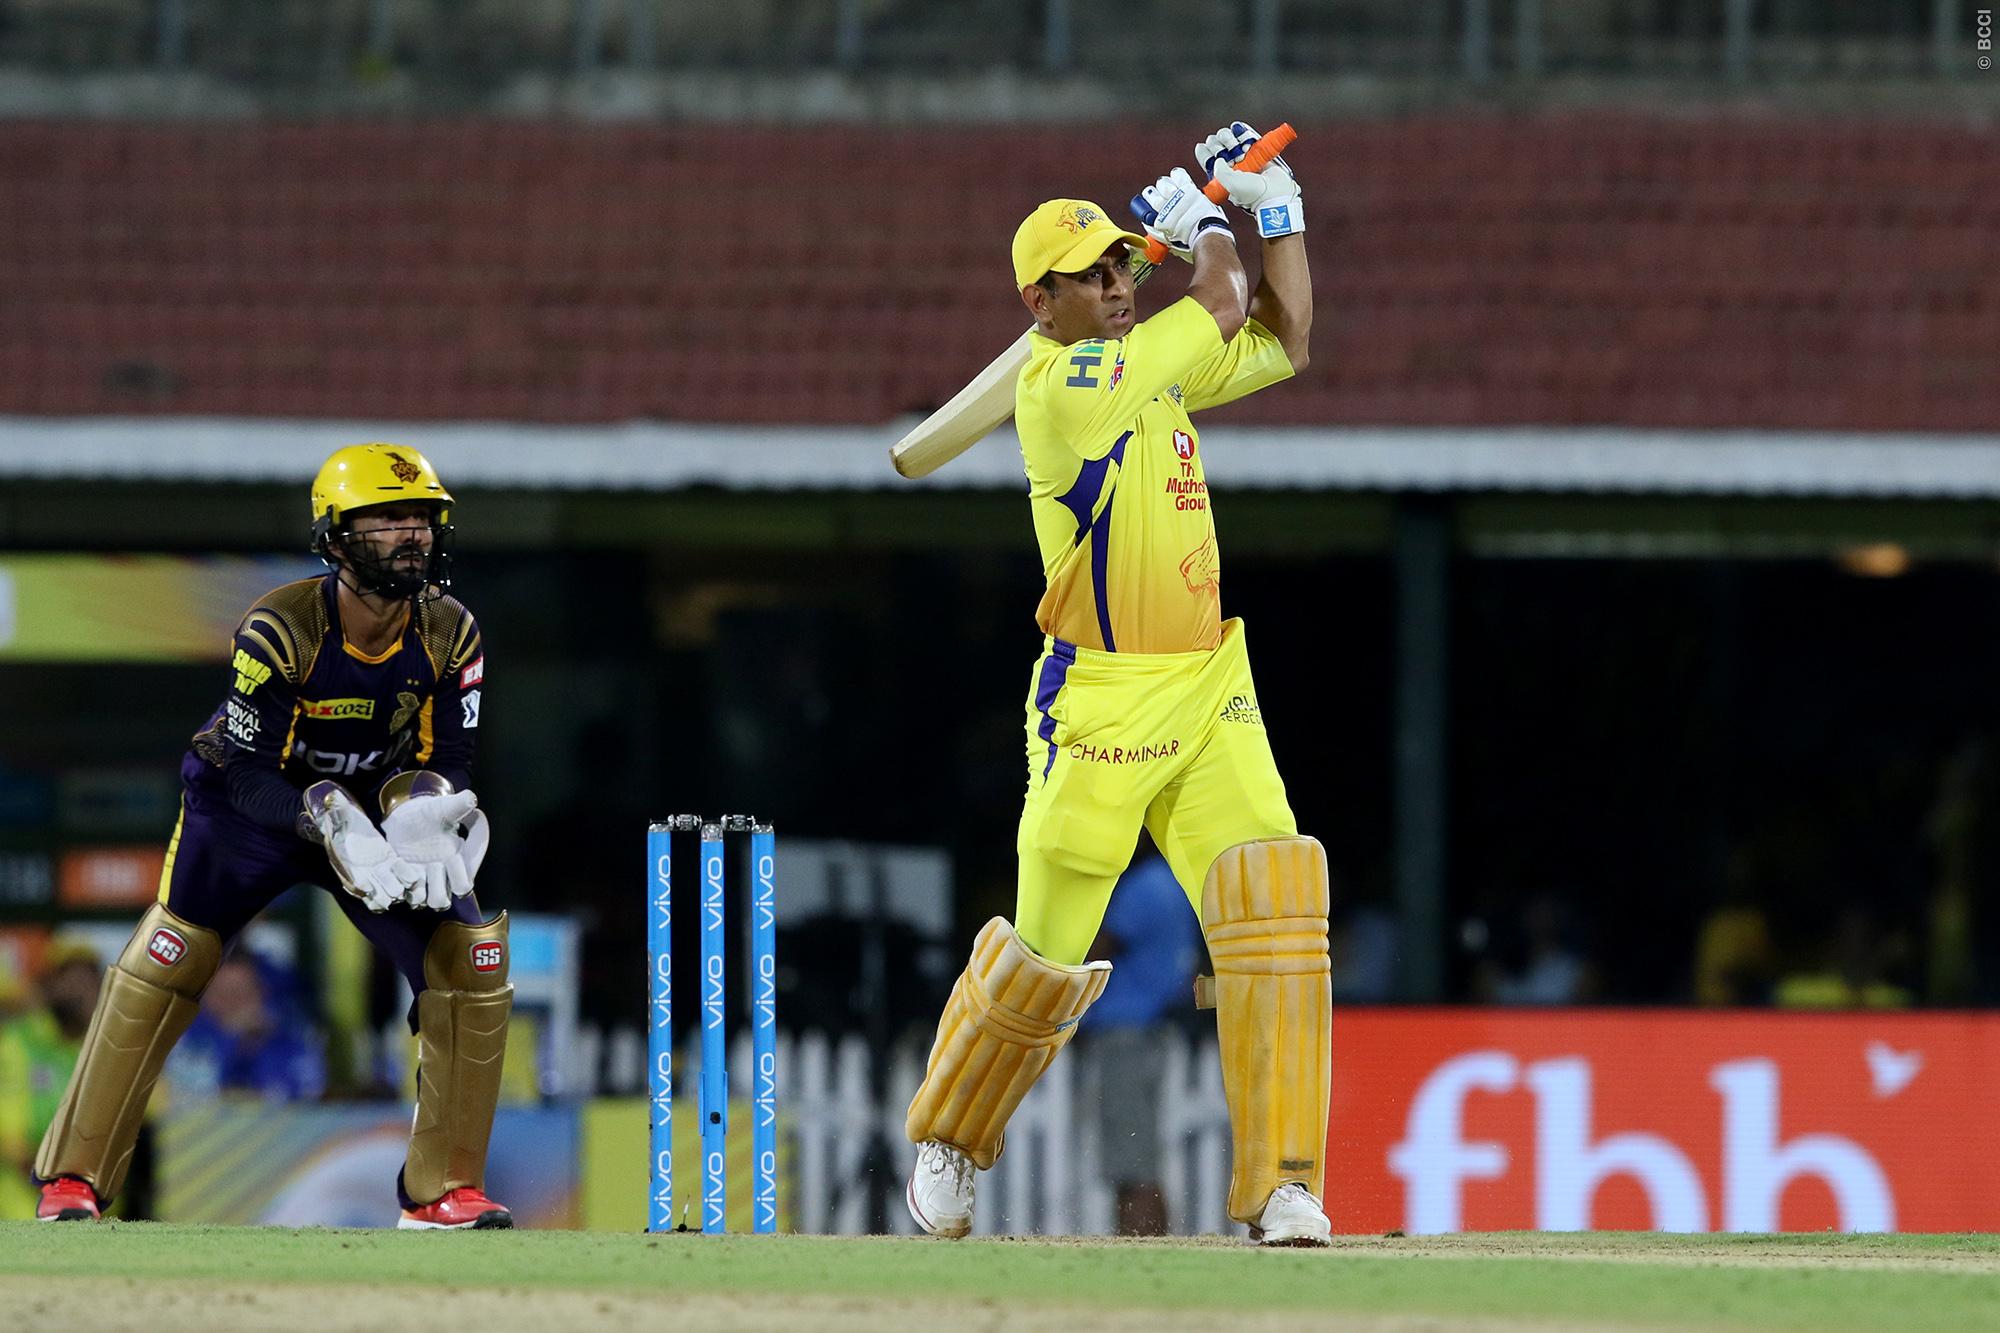 IPL 2018 RESULT: MS Dhoni’s Army Wins it at Home Ground [Video Highlights]